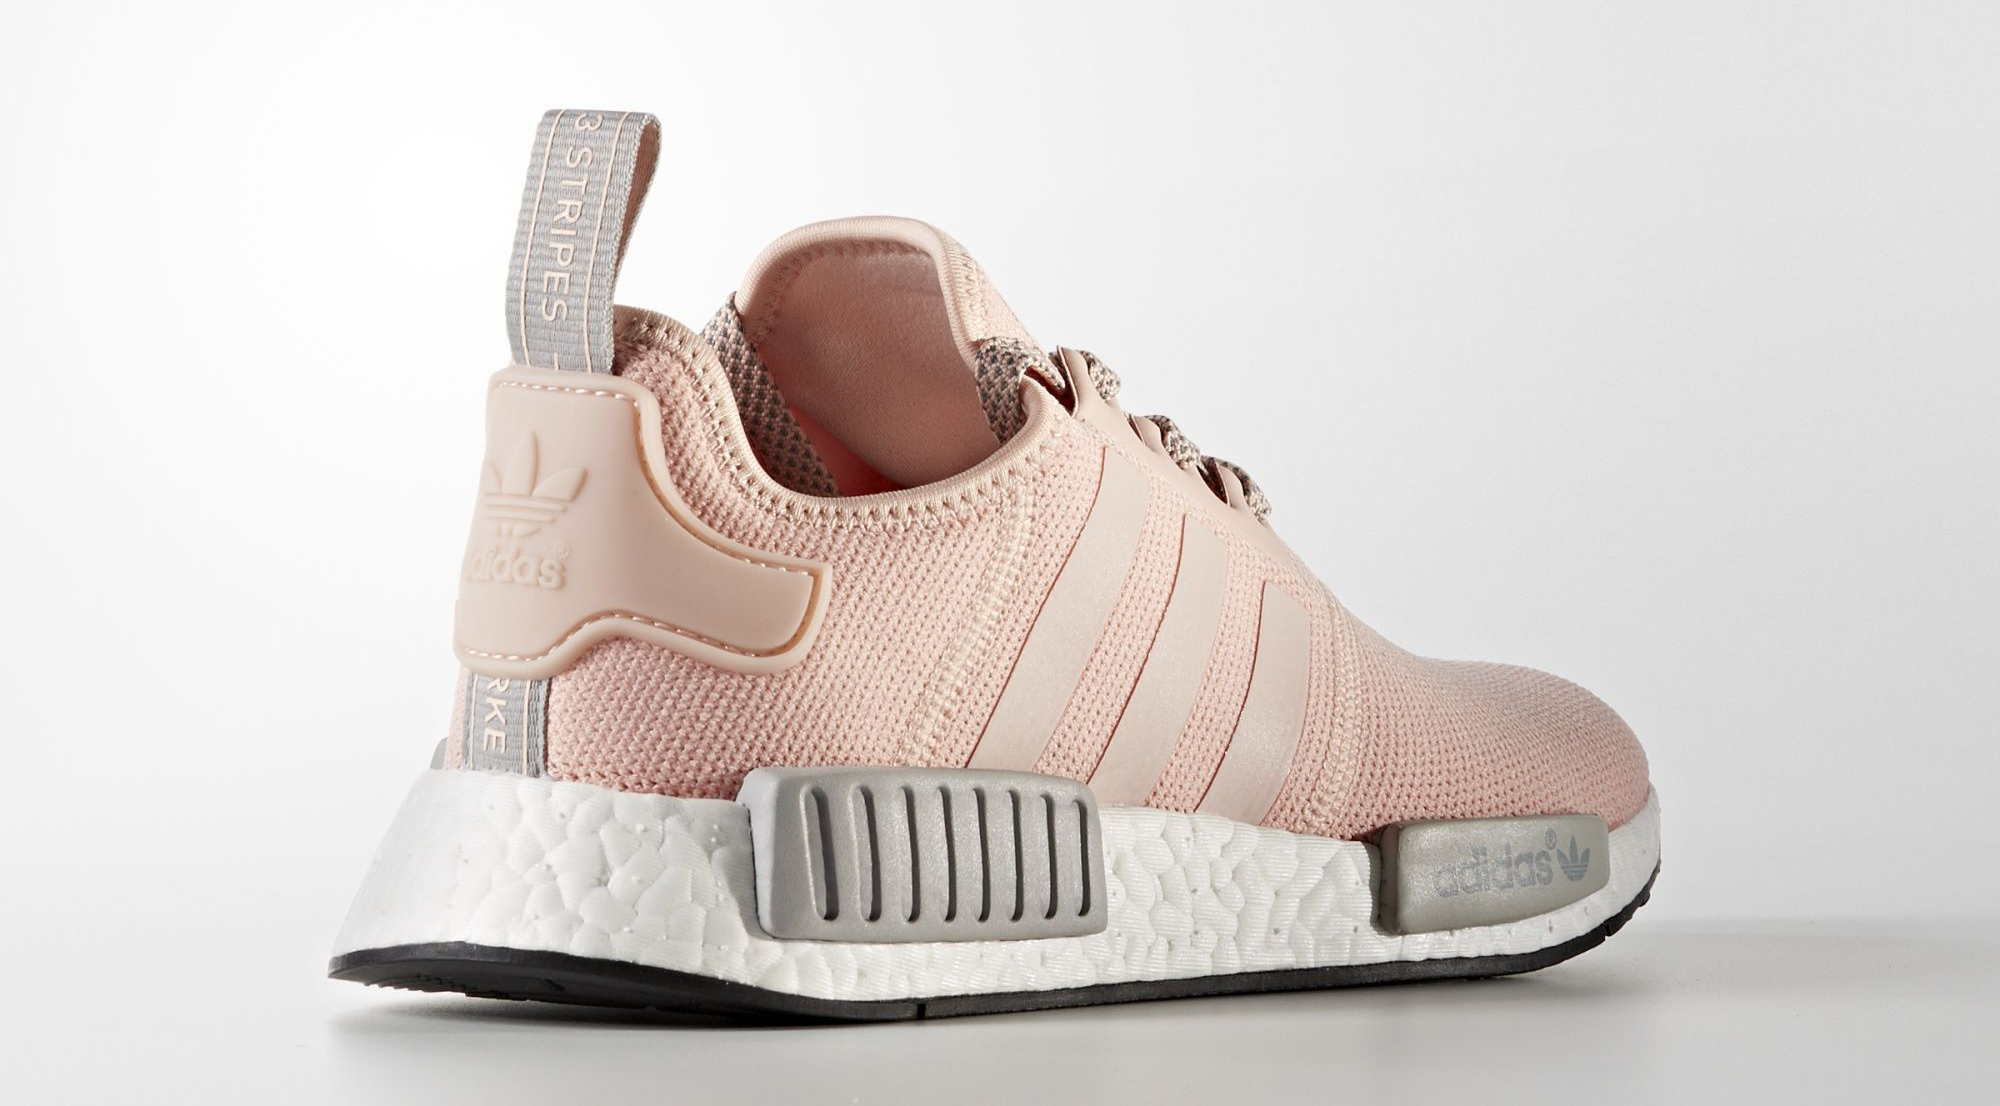 adidas-wmns-nmd_r1-vapour-pink-1